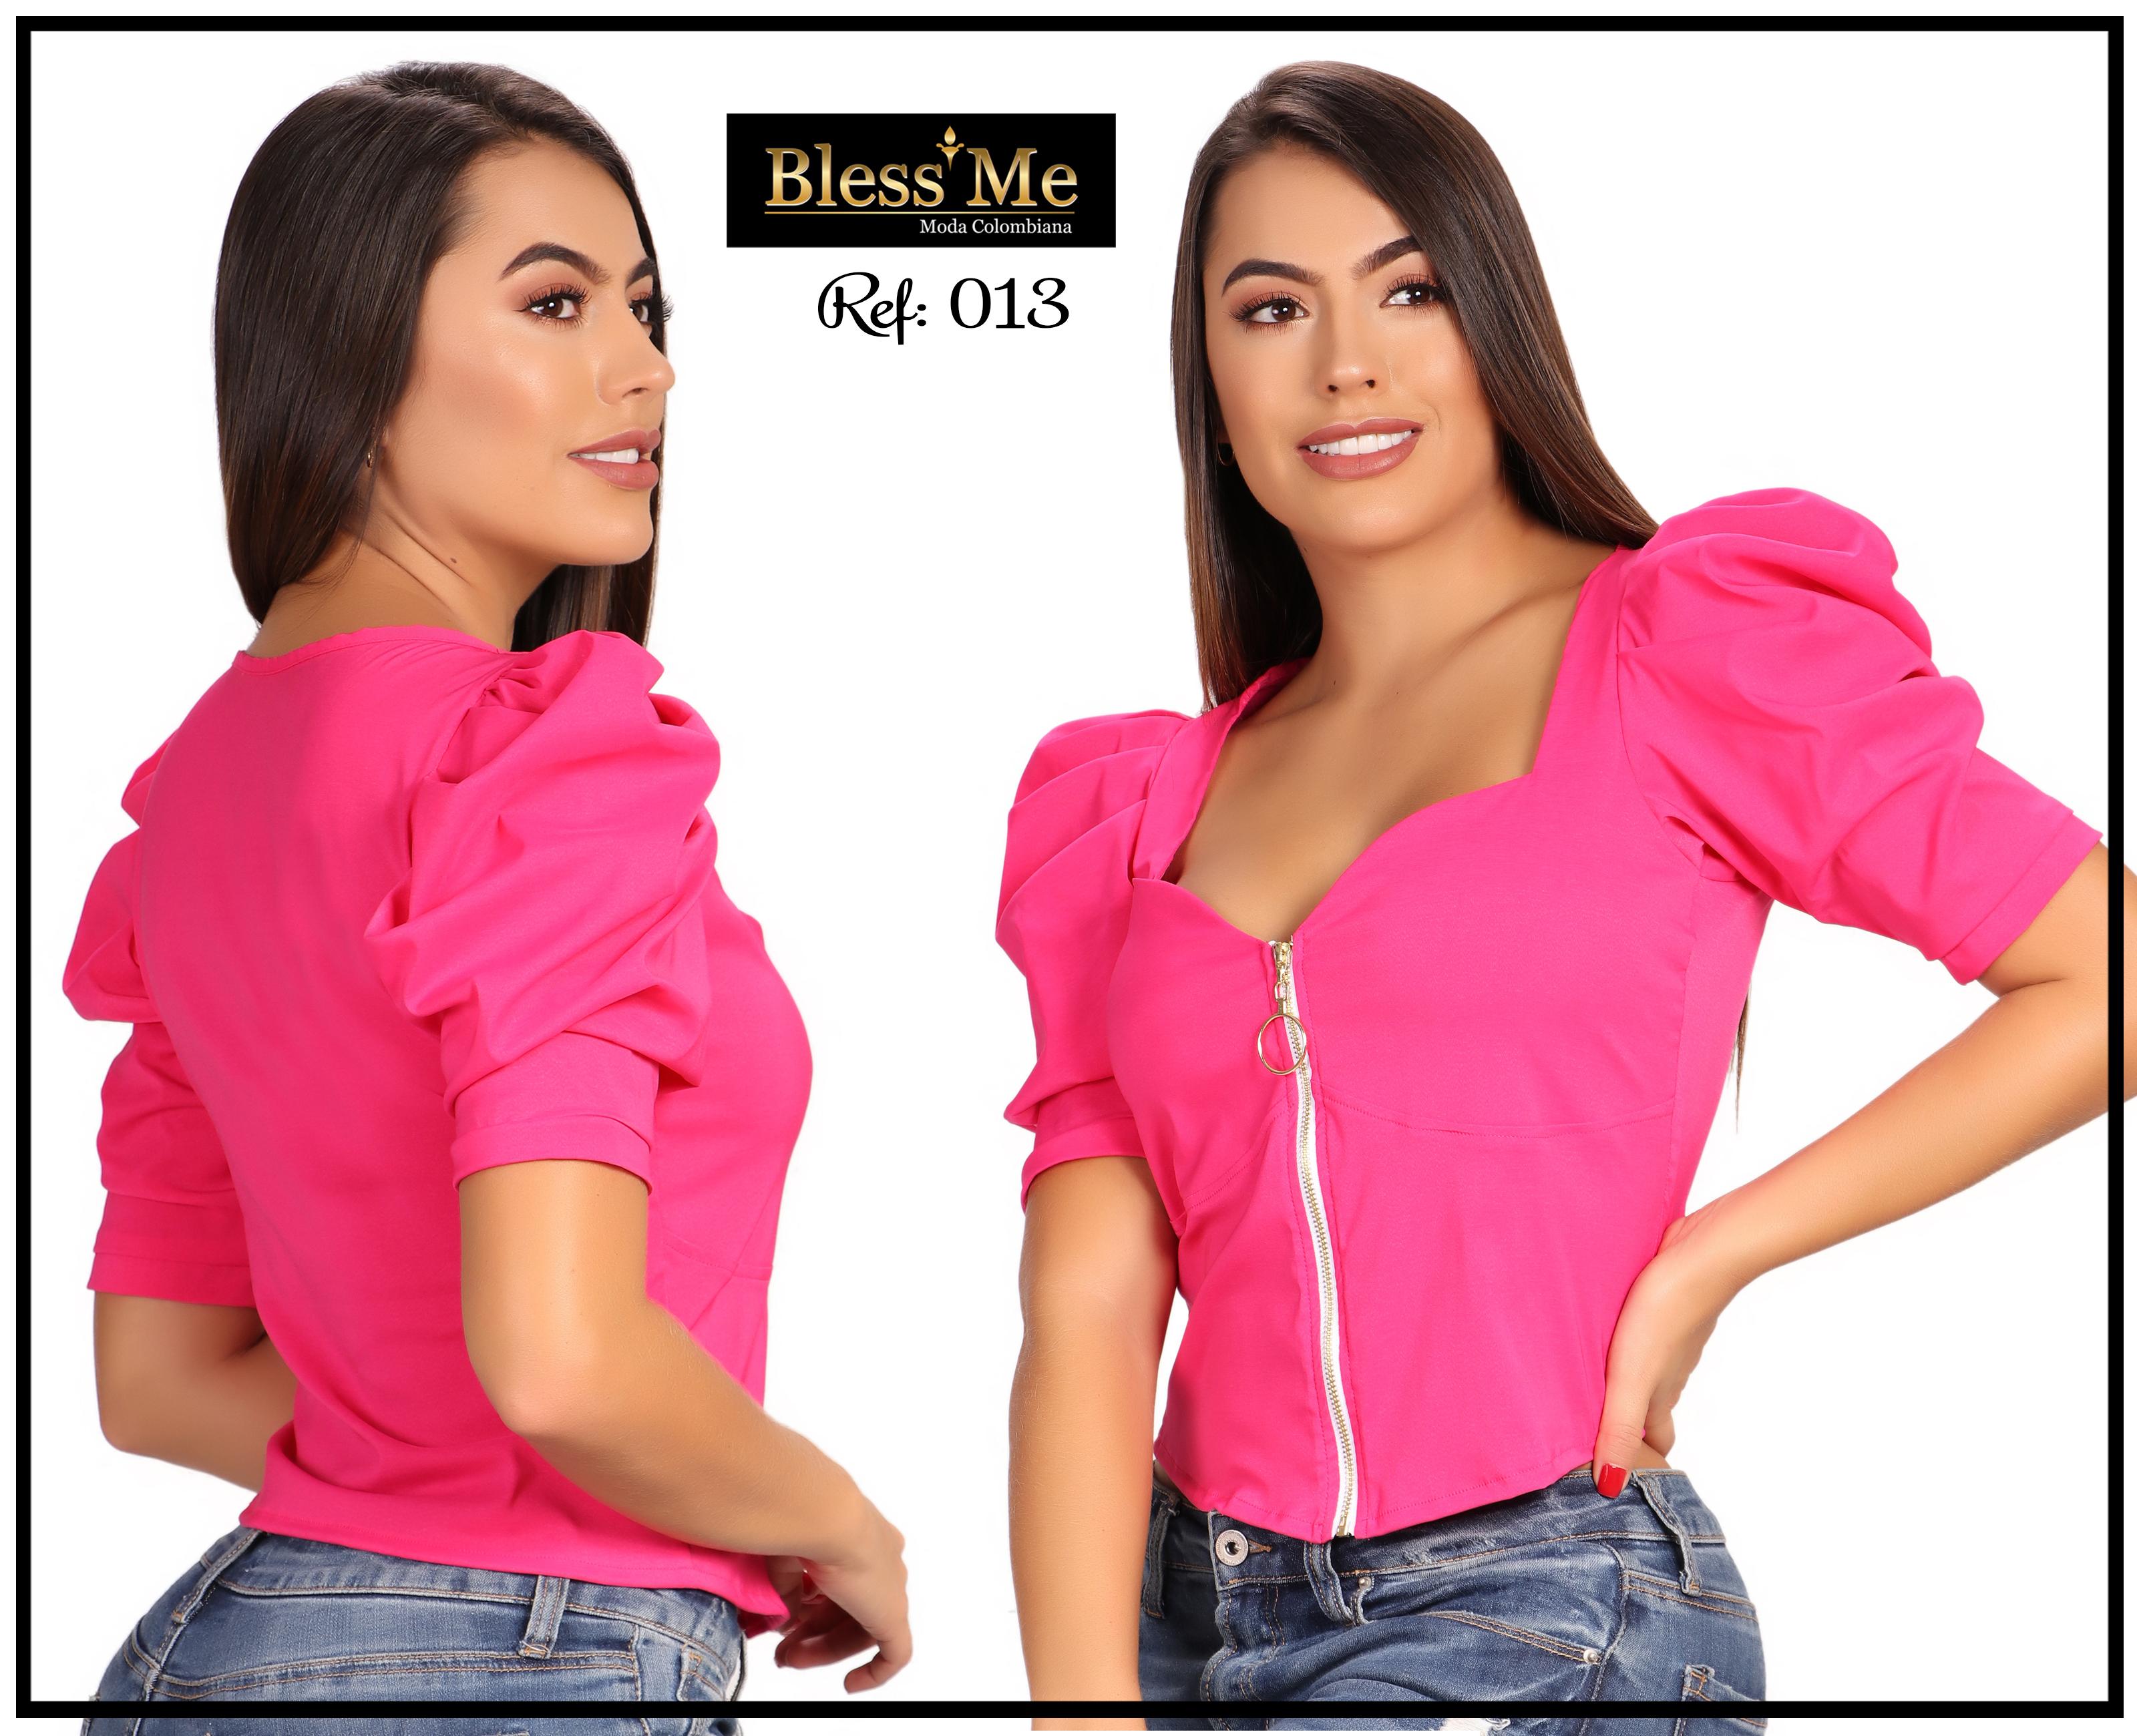 Blusa Colombiana Bless me